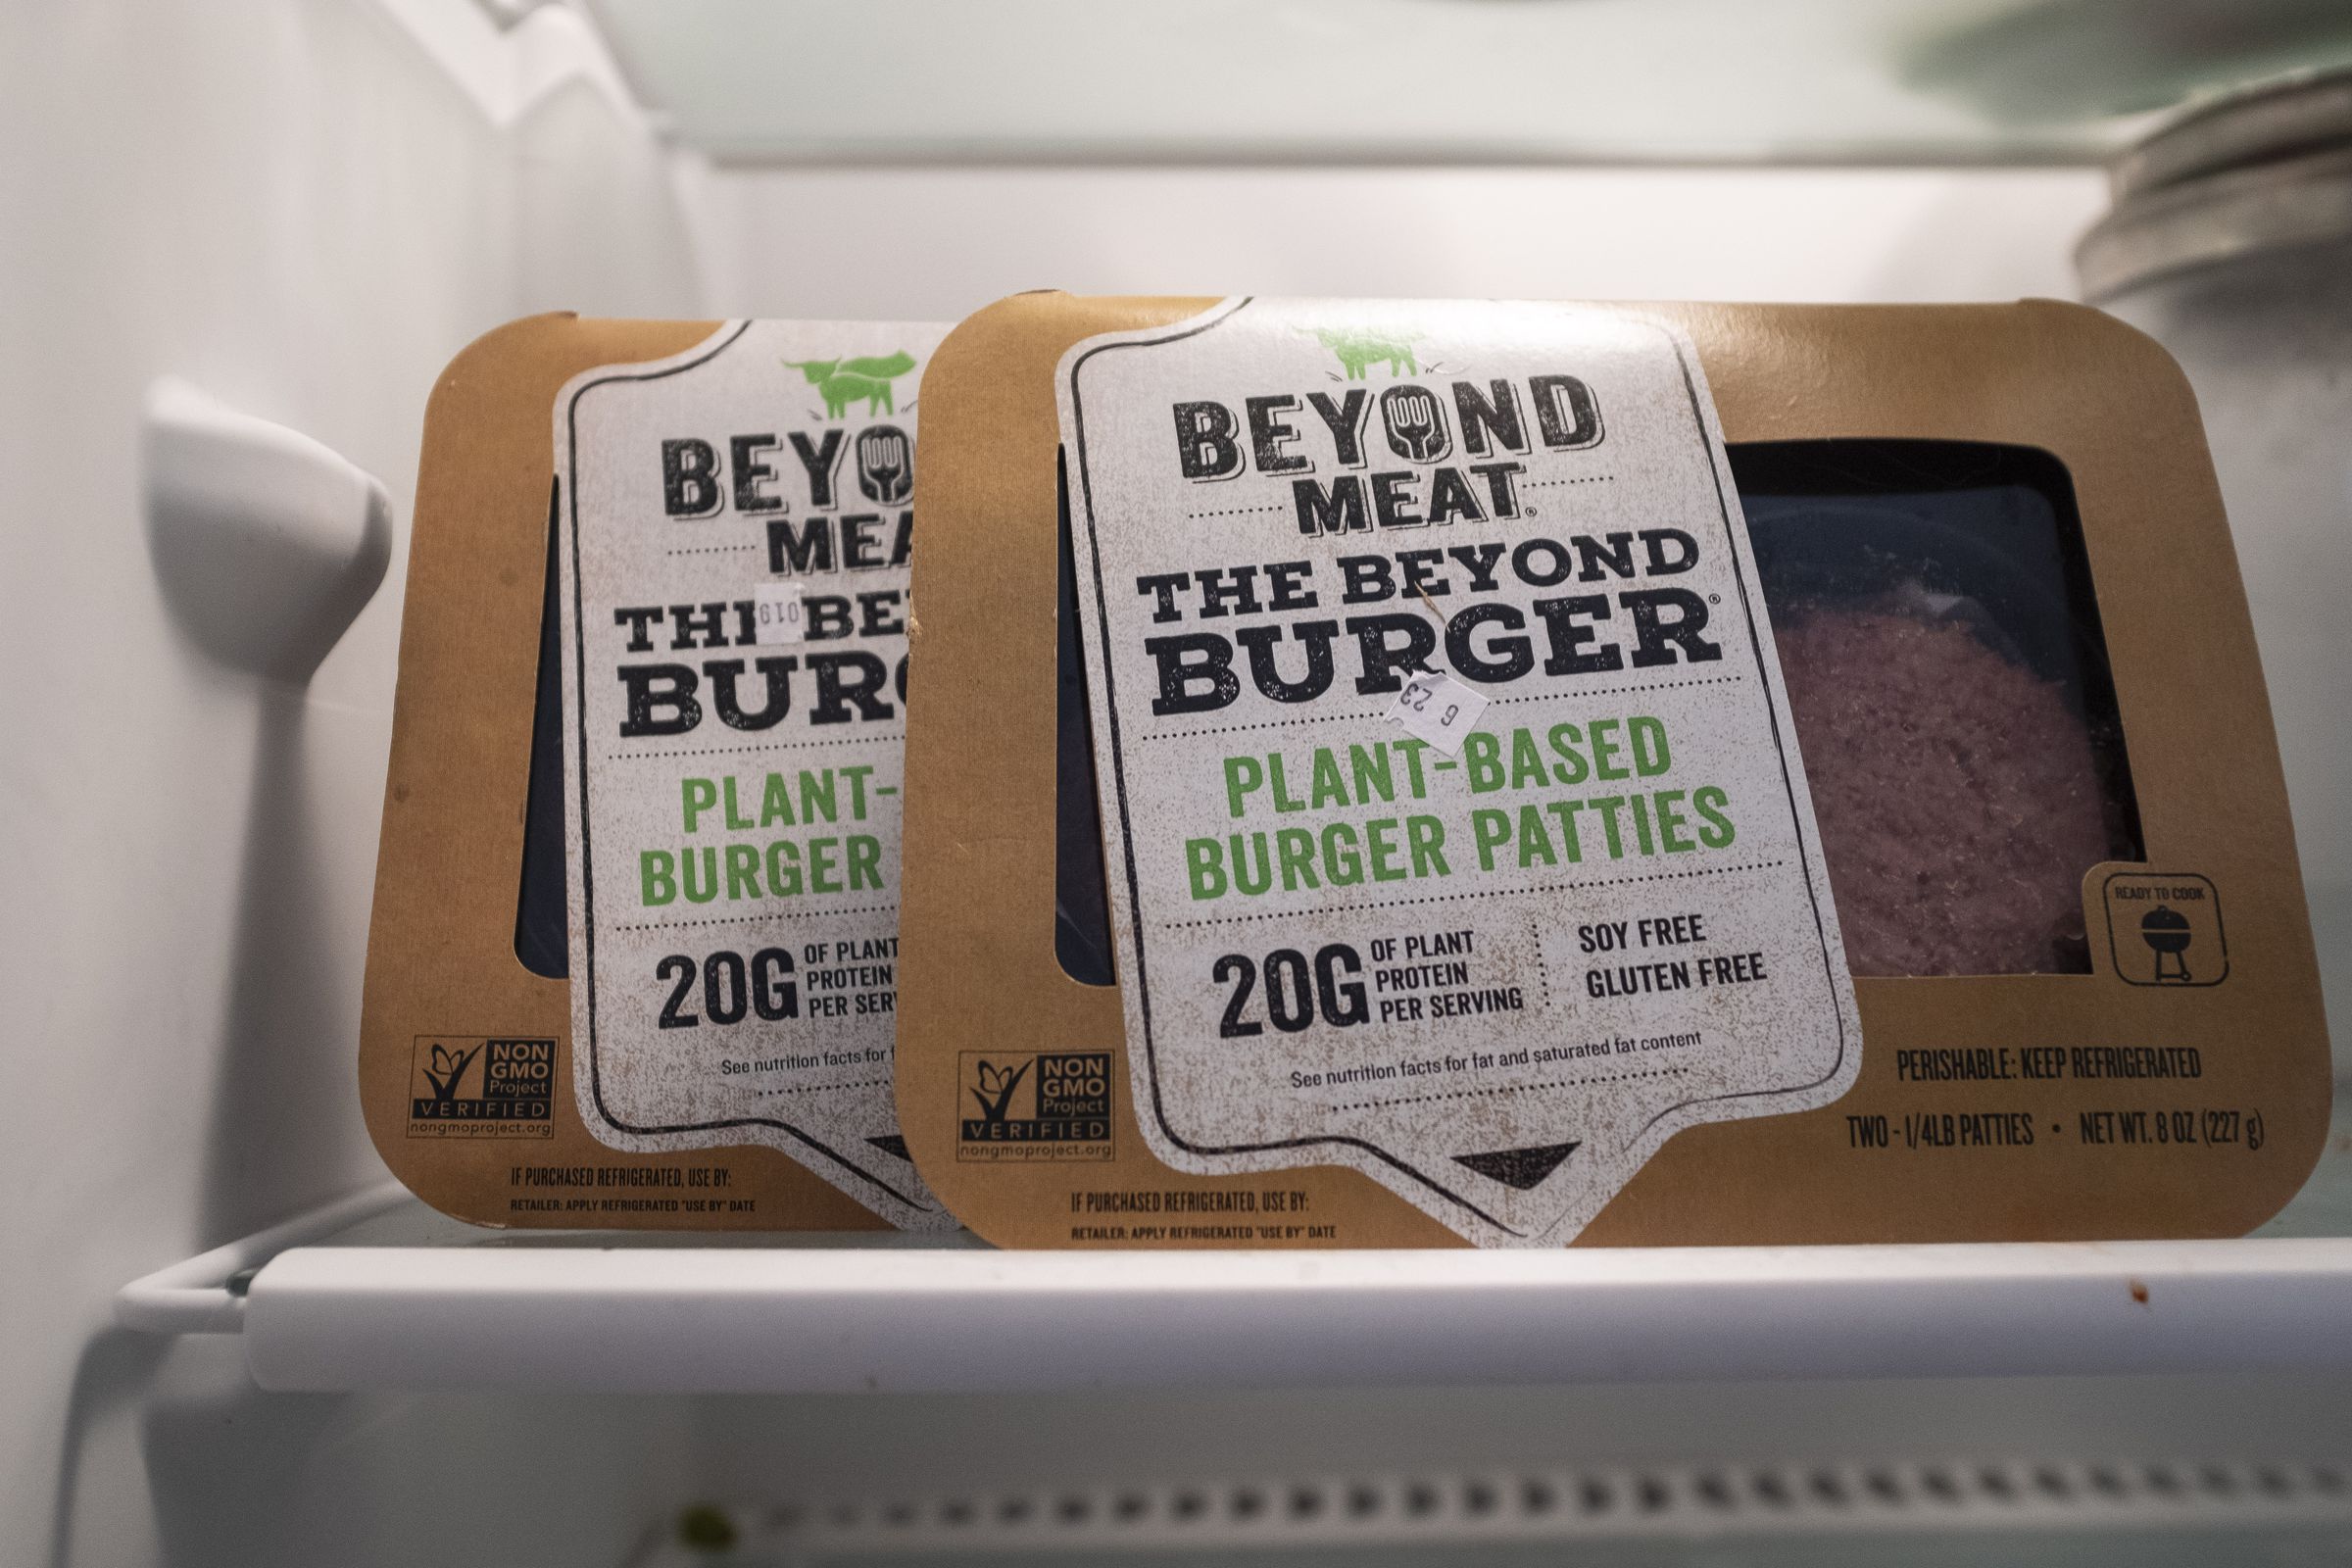 Meatless Burger Maker Beyond Meat’s Stock Price Continues It’s Skyrocketing Rise Since Its IPO In May